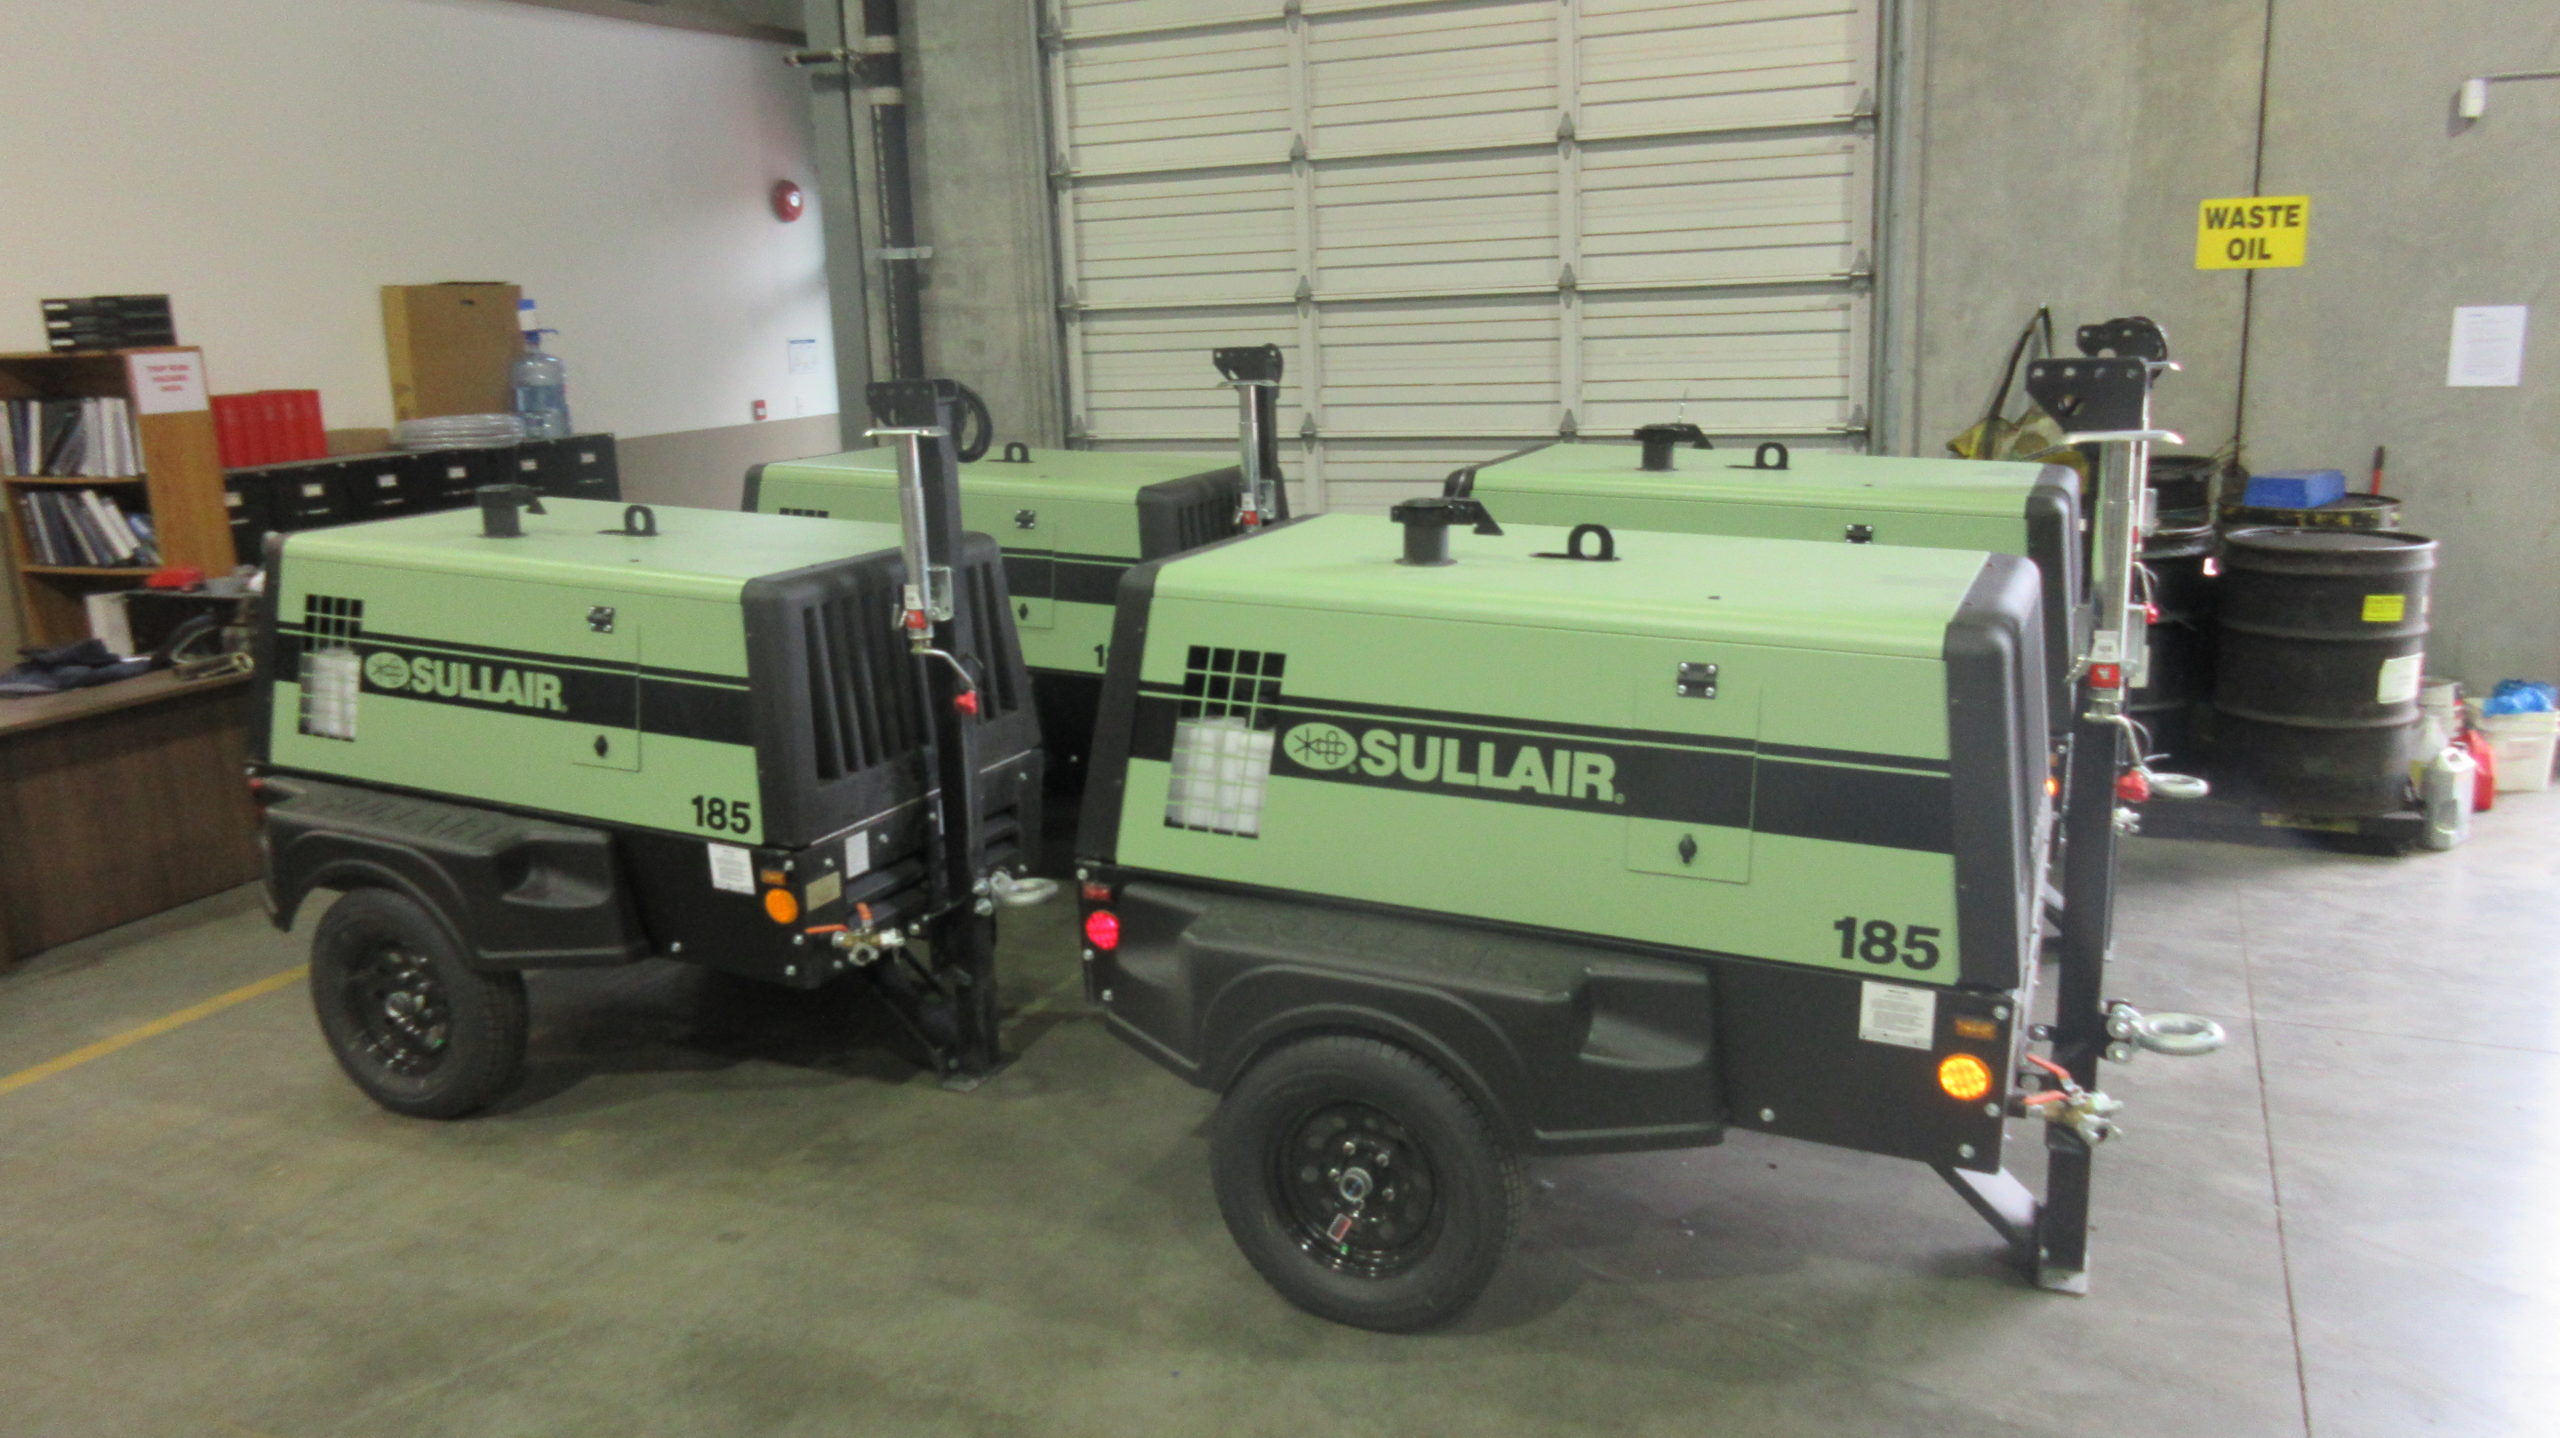 4 sullair portable air compressors in warehouse